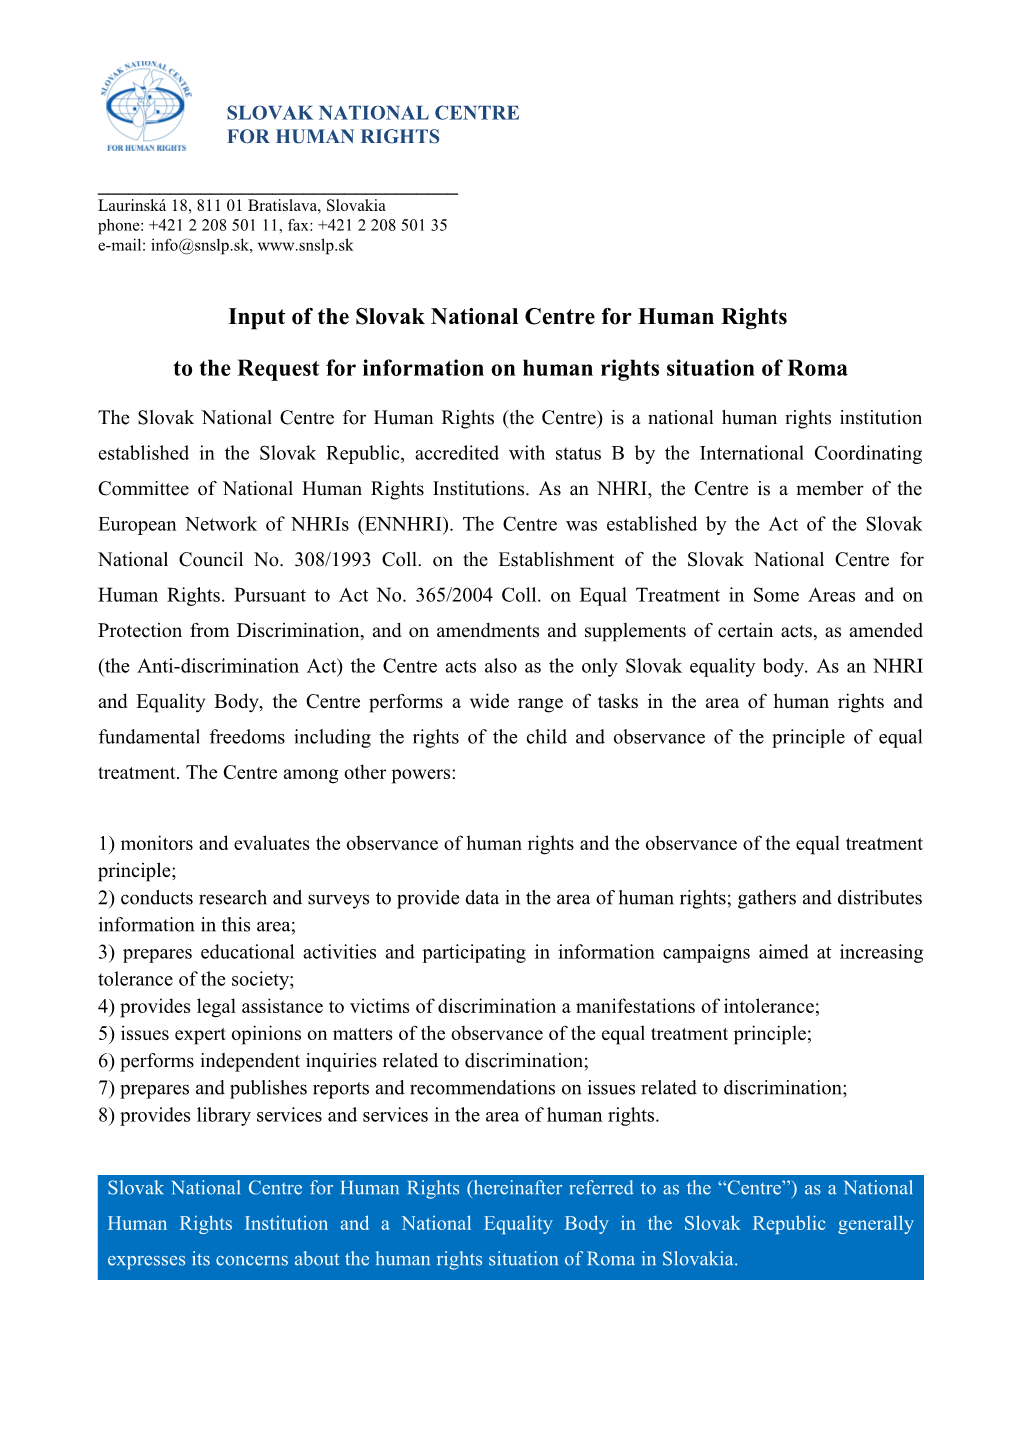 Input of the Slovak National Centre for Human Rights